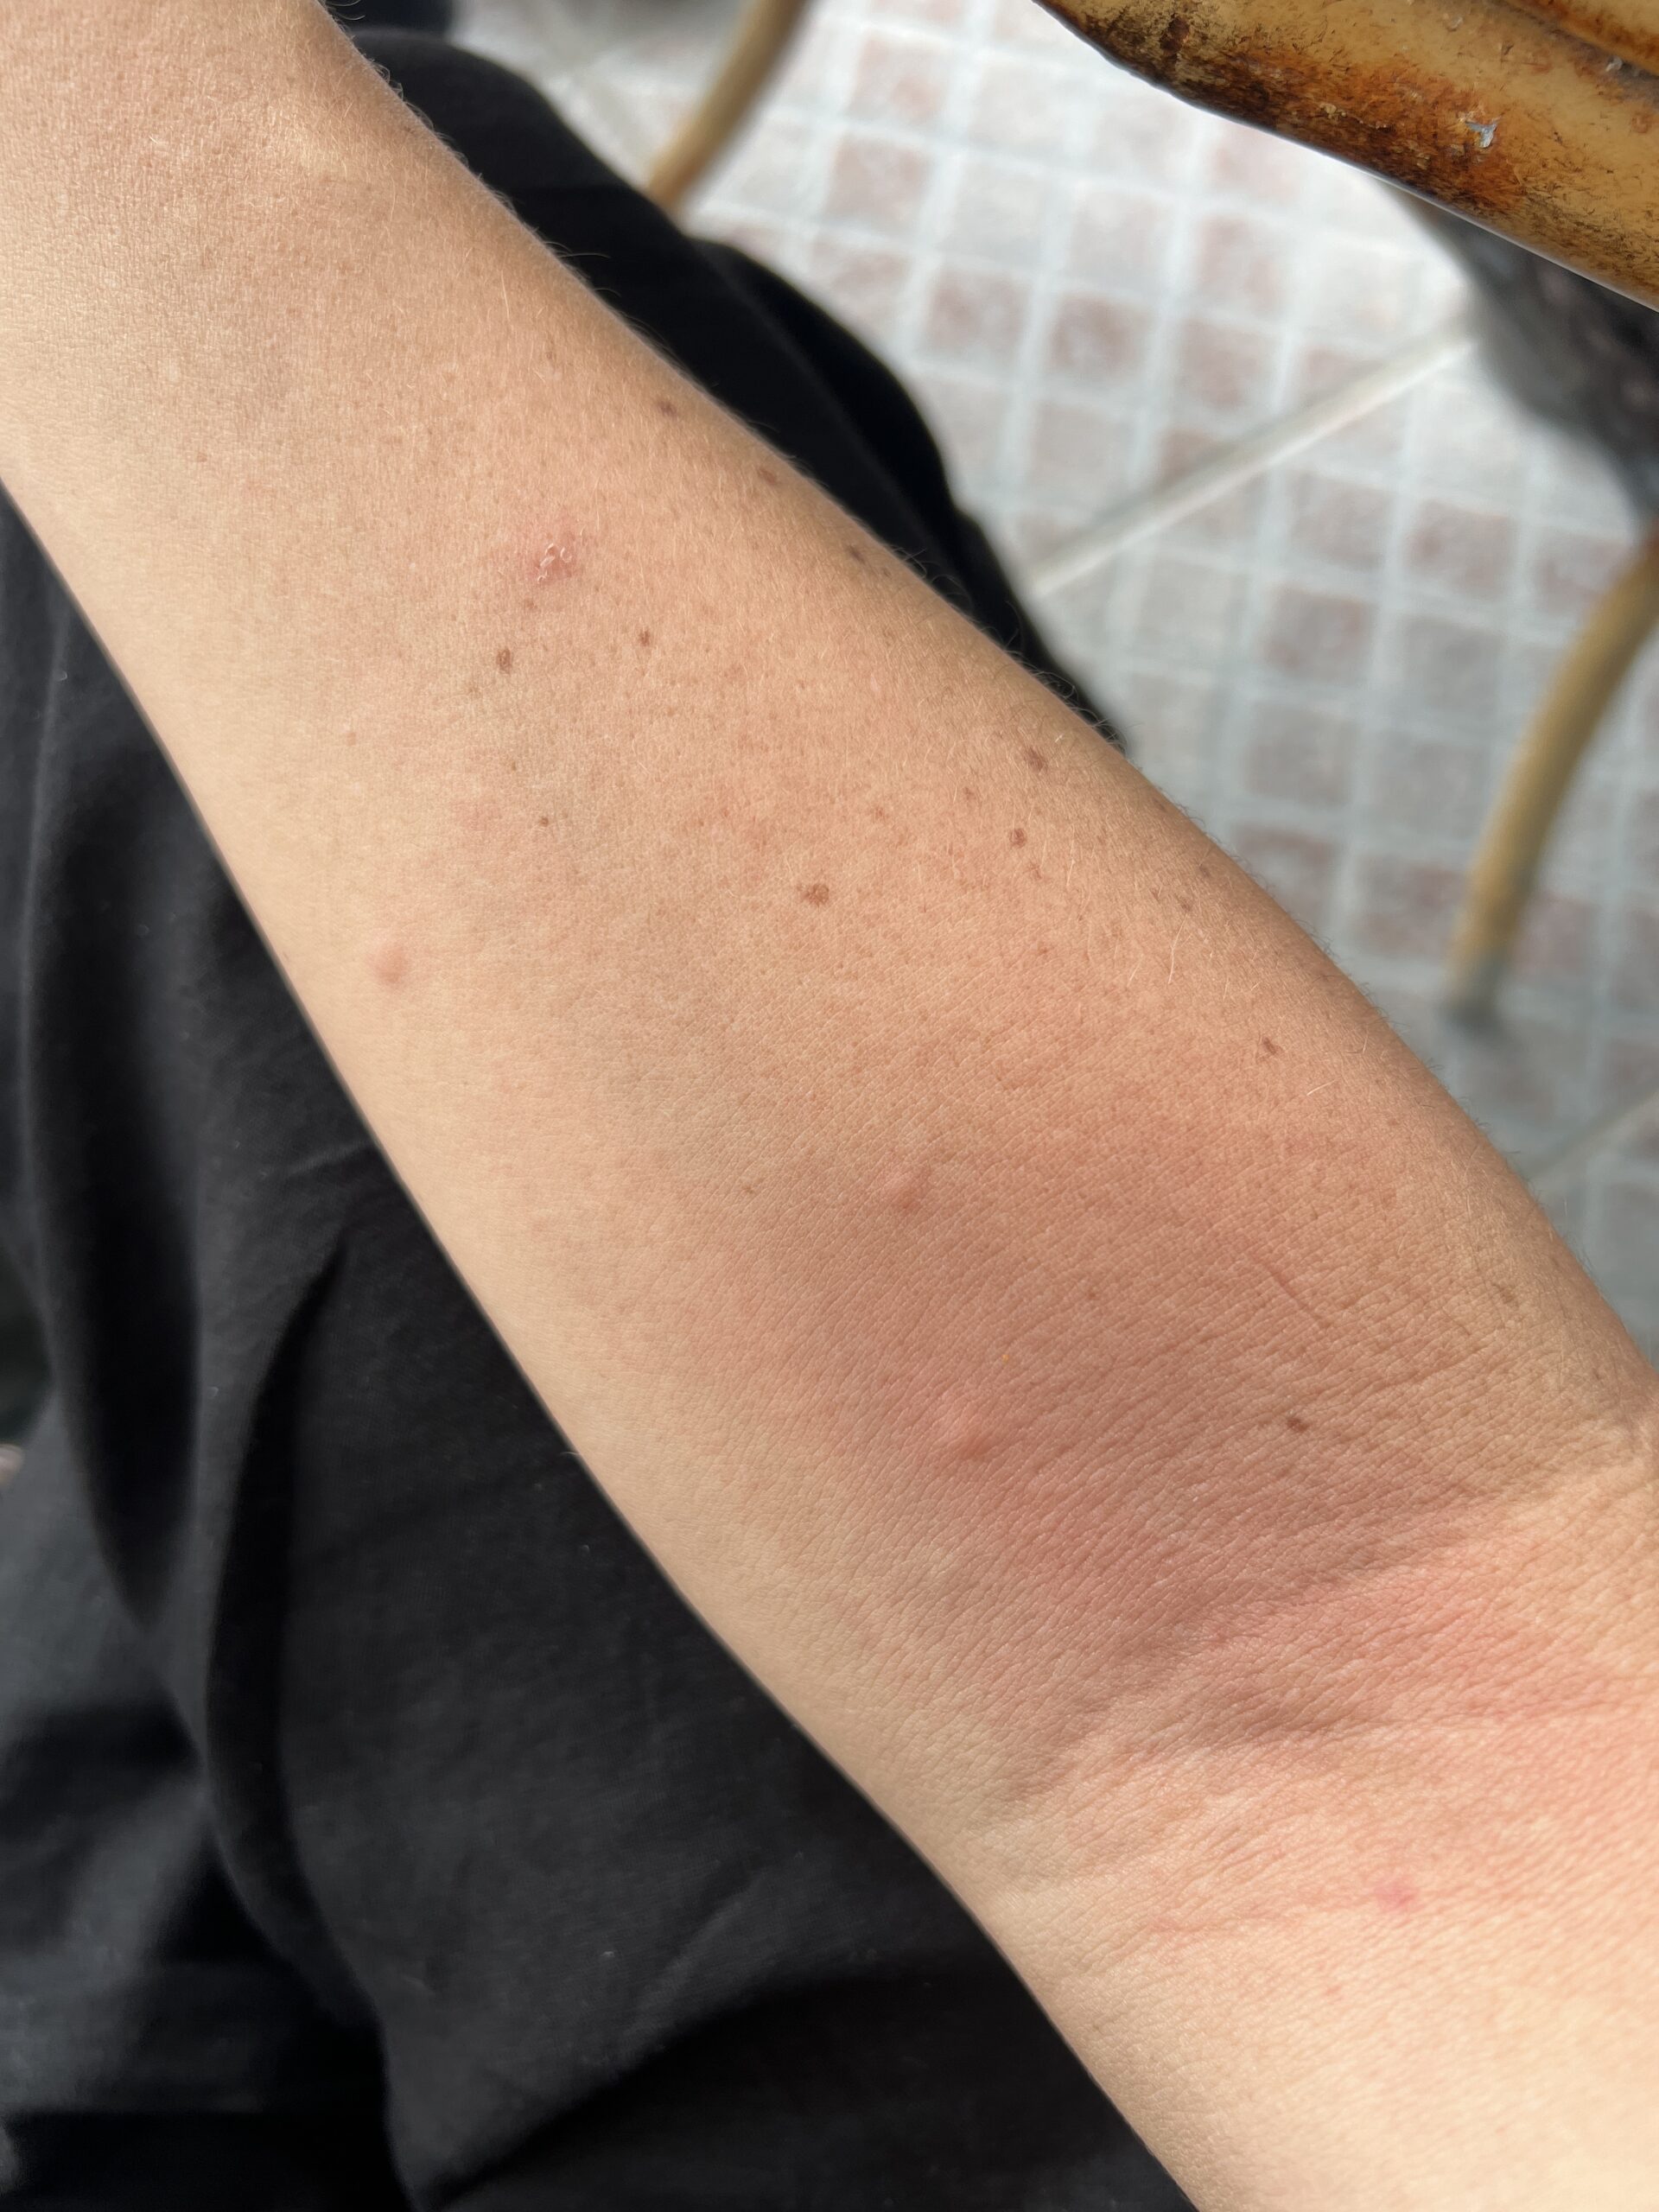 A close up of a woman's arm from bug bites.